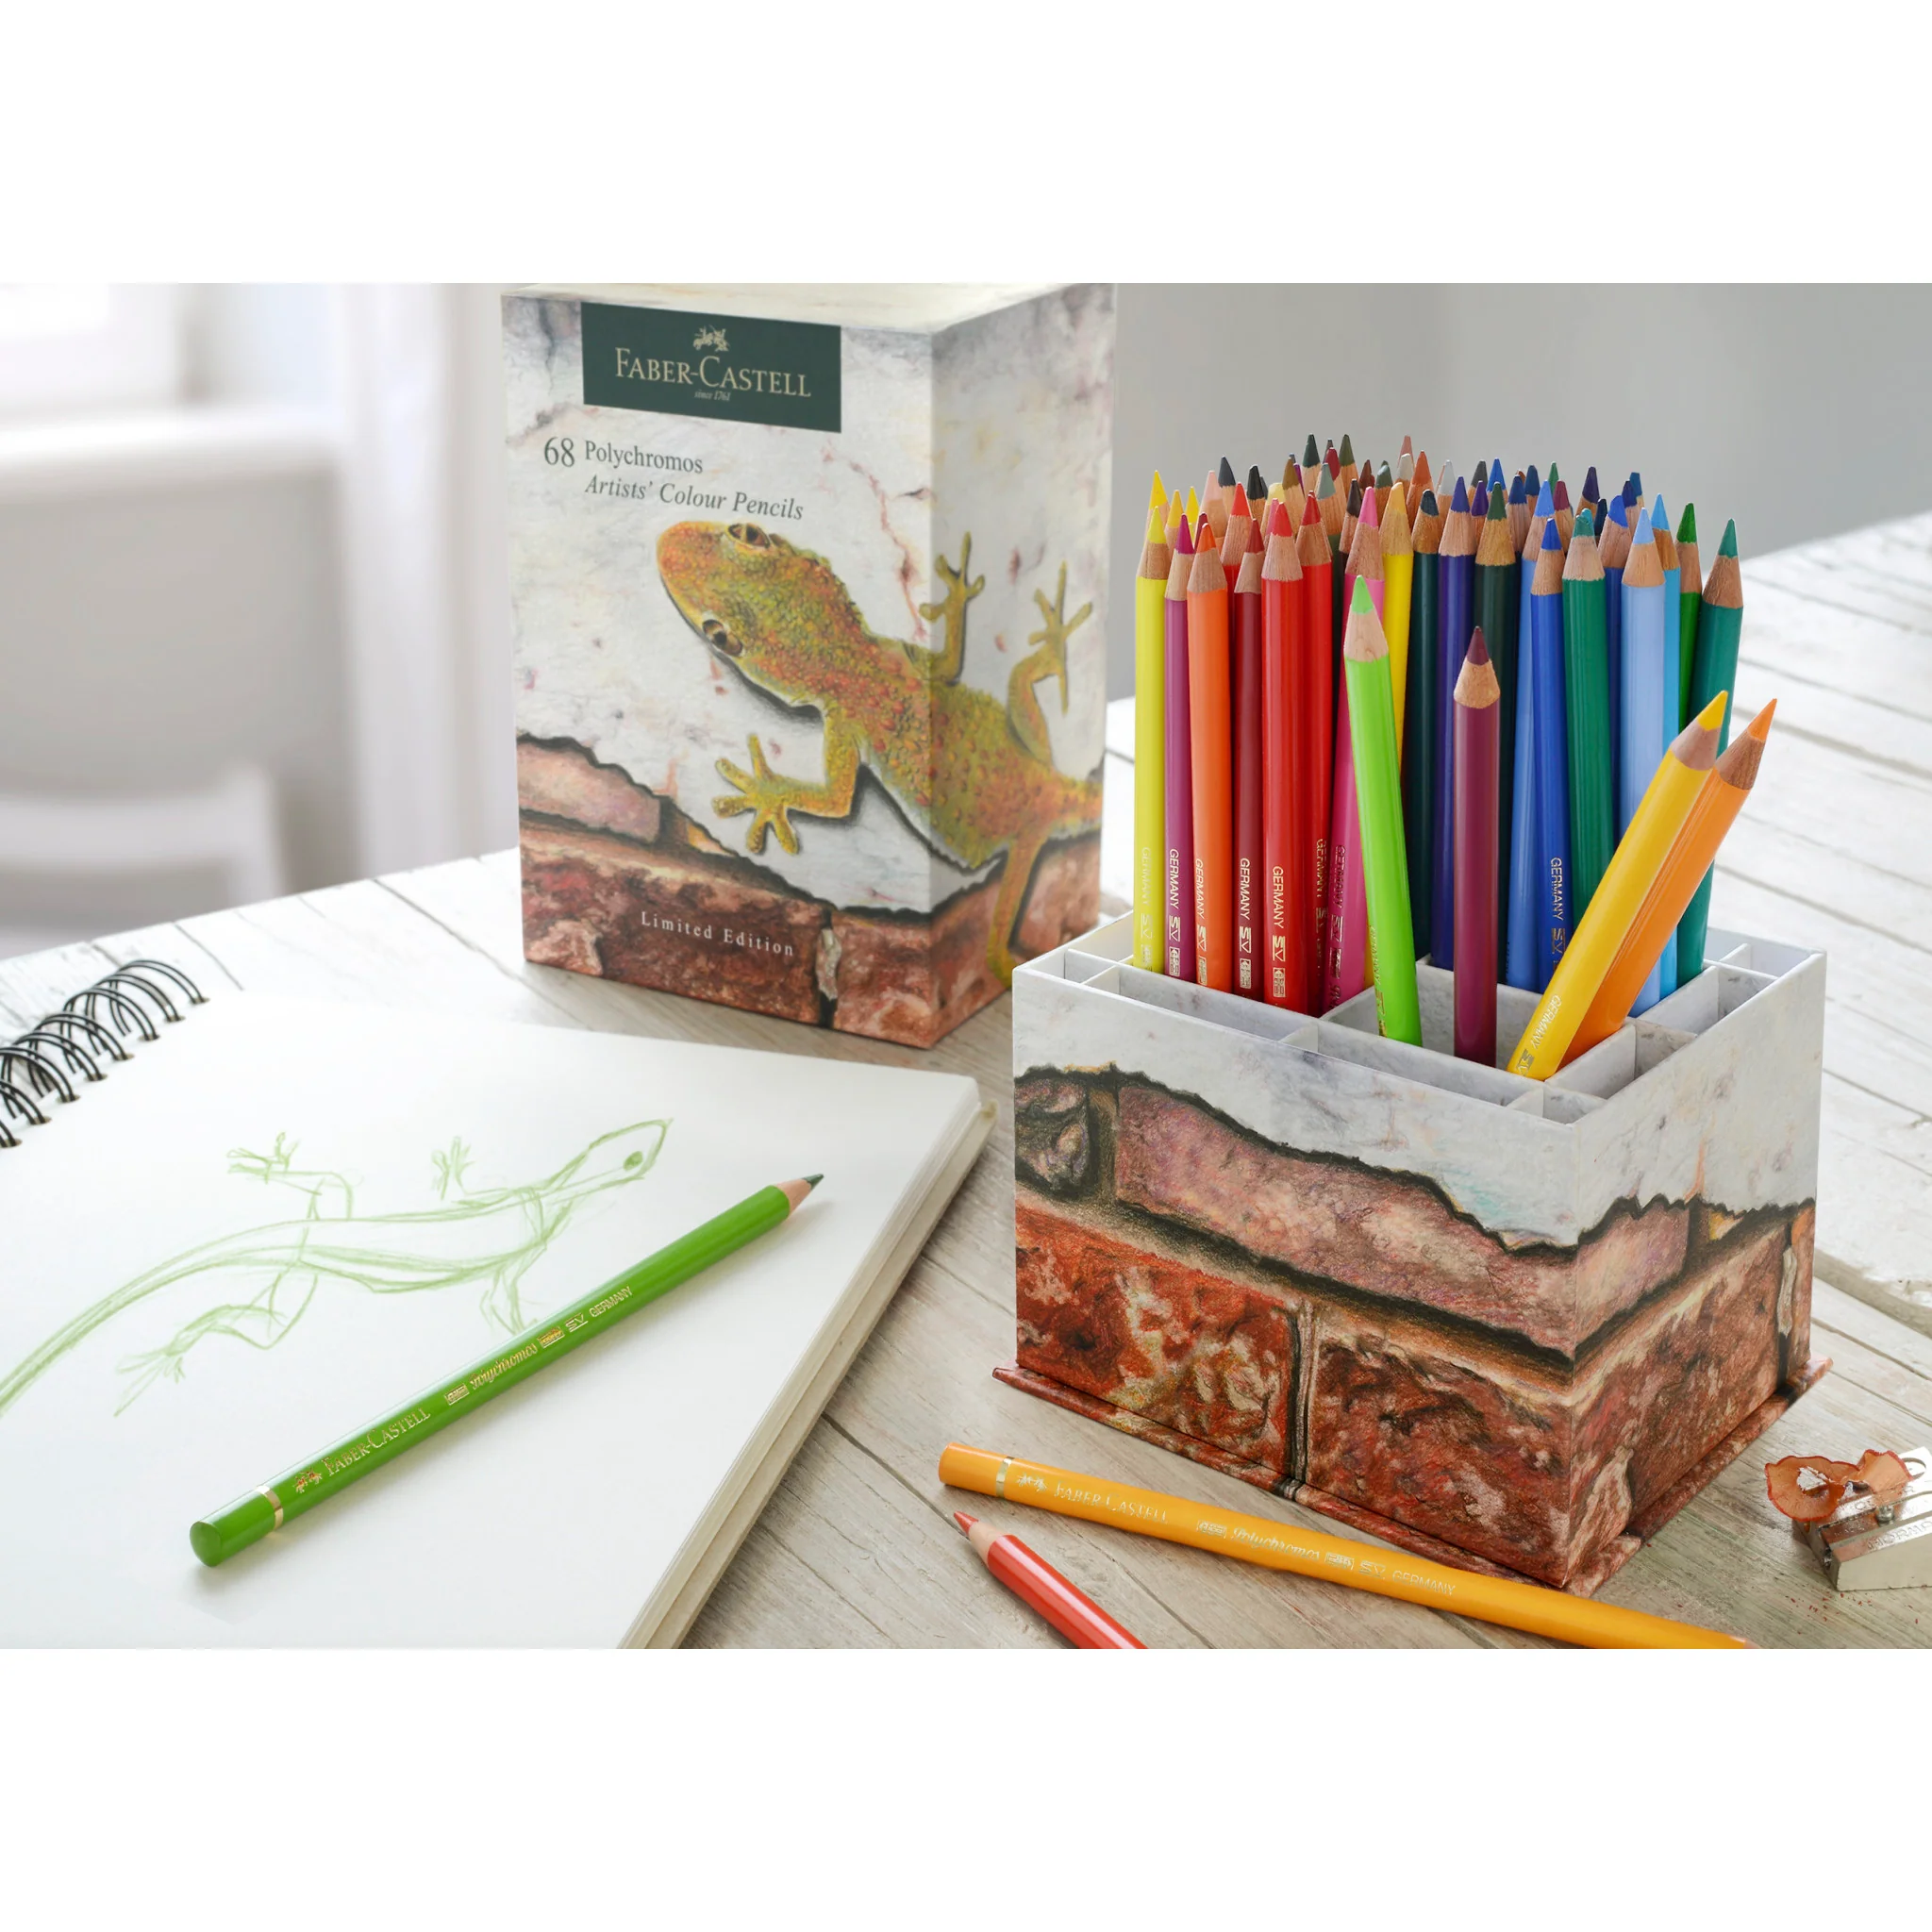 Polychromos Artists' Color Pencils, 68-Piece Limited Edition - Faber-Castell